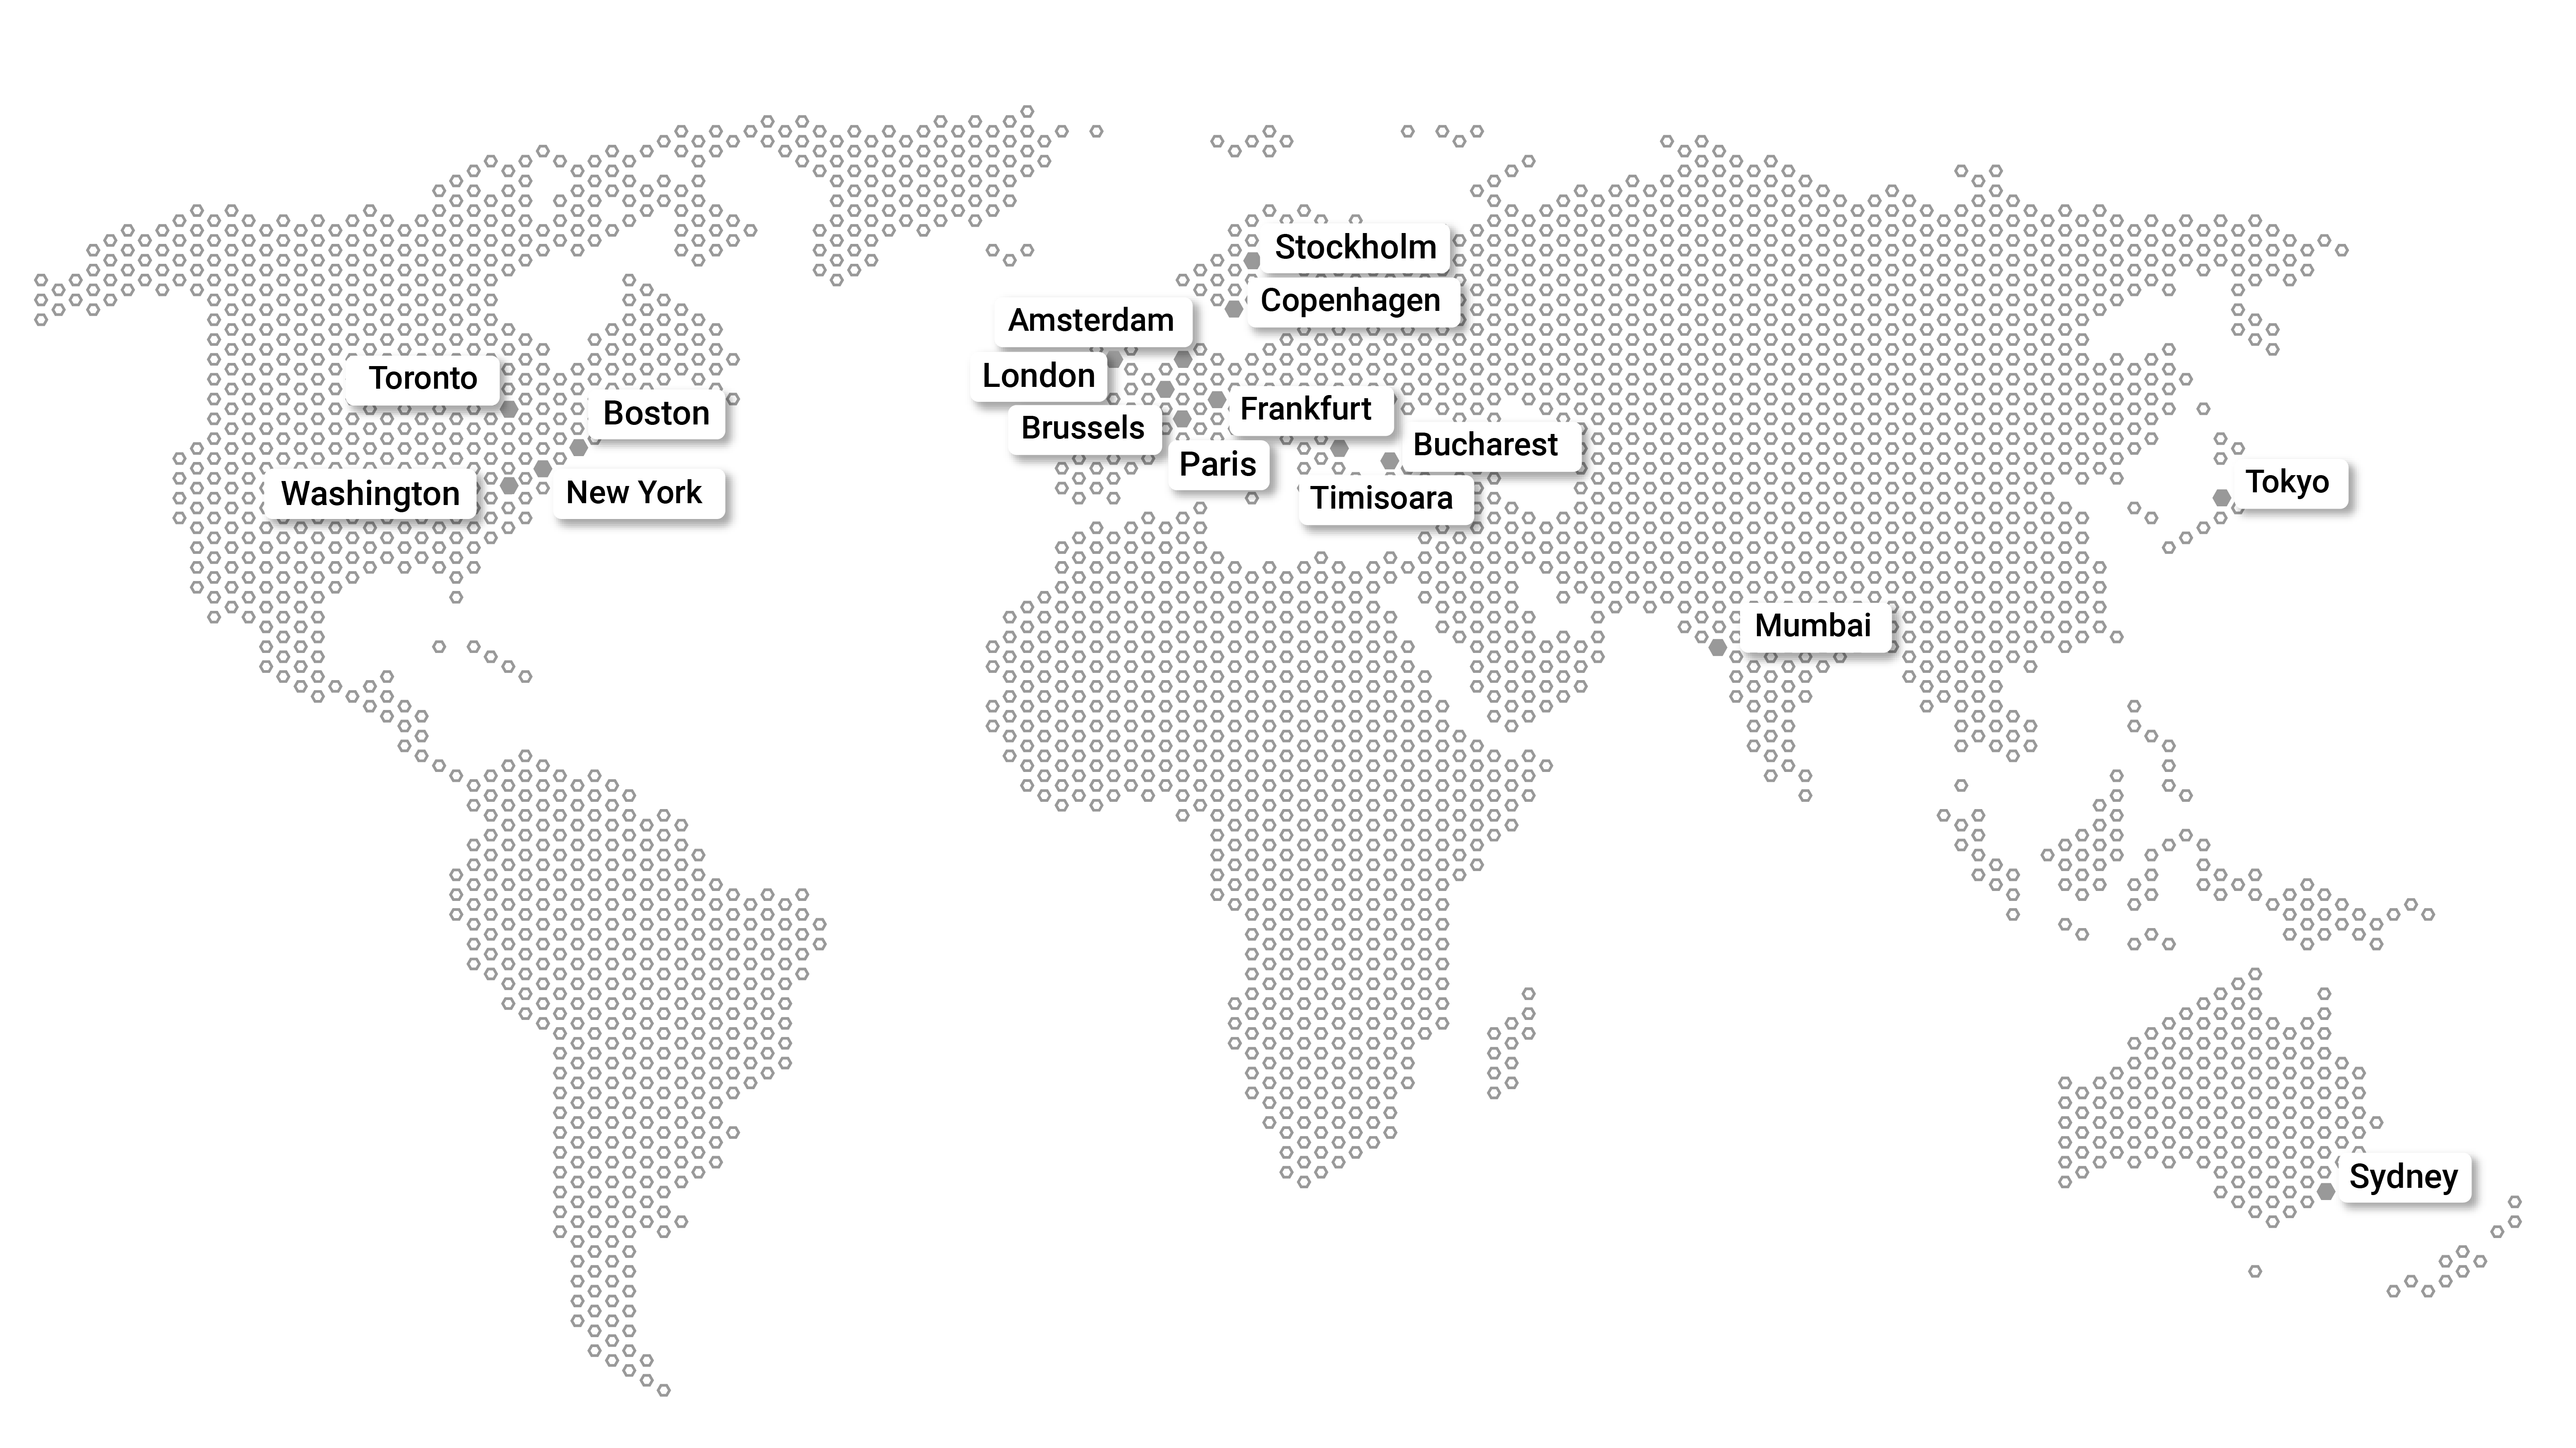 Map of Morningstar Sustainalytics Global Offices